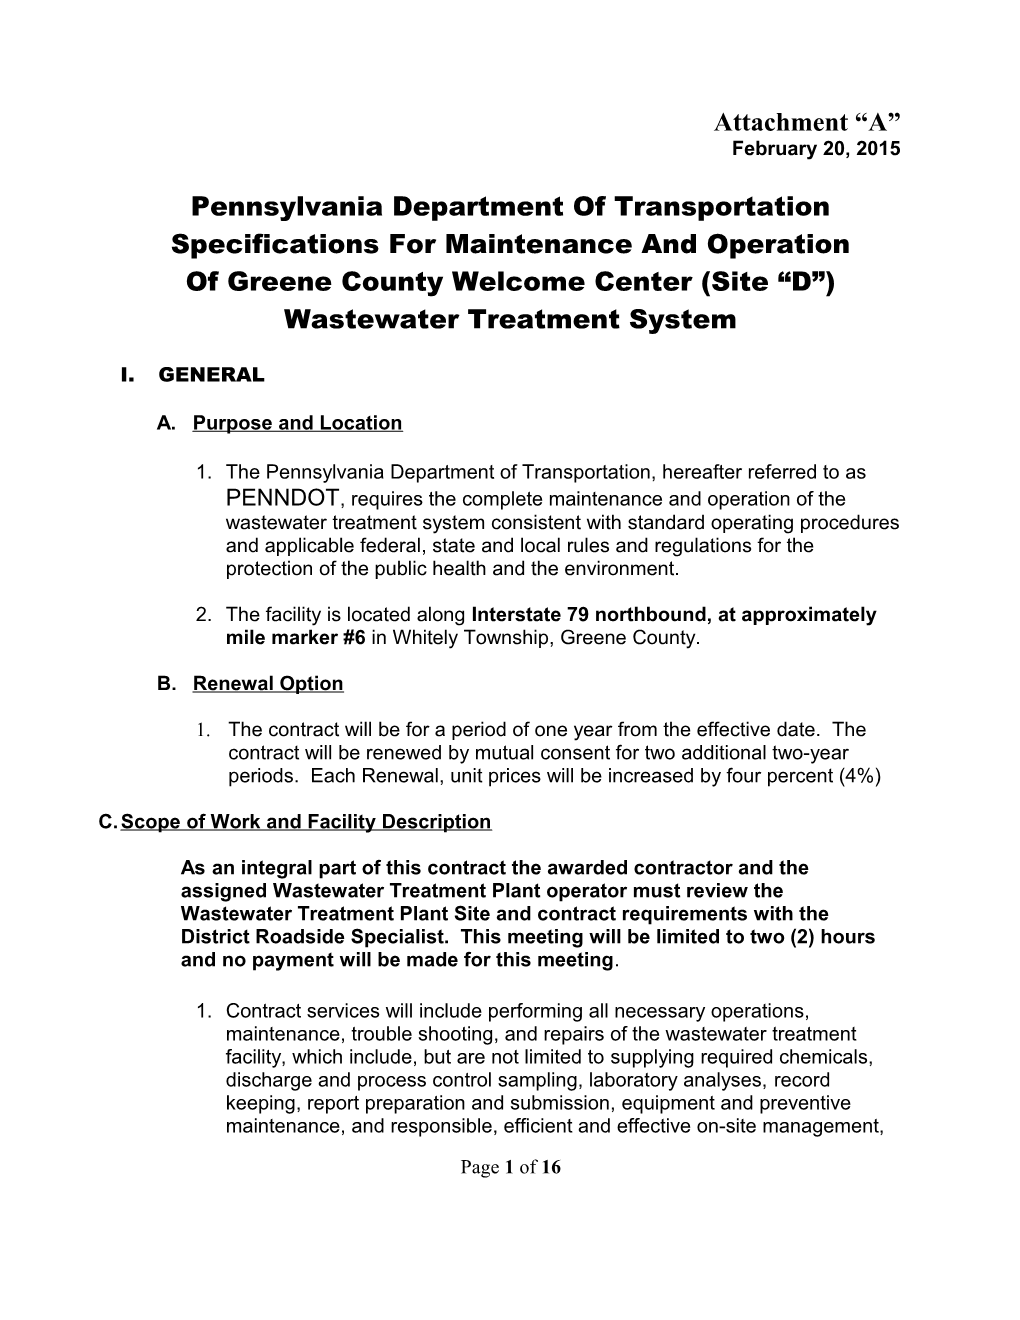 Pennsylvania Department of Transportation Specifications for Maintenance and Operation